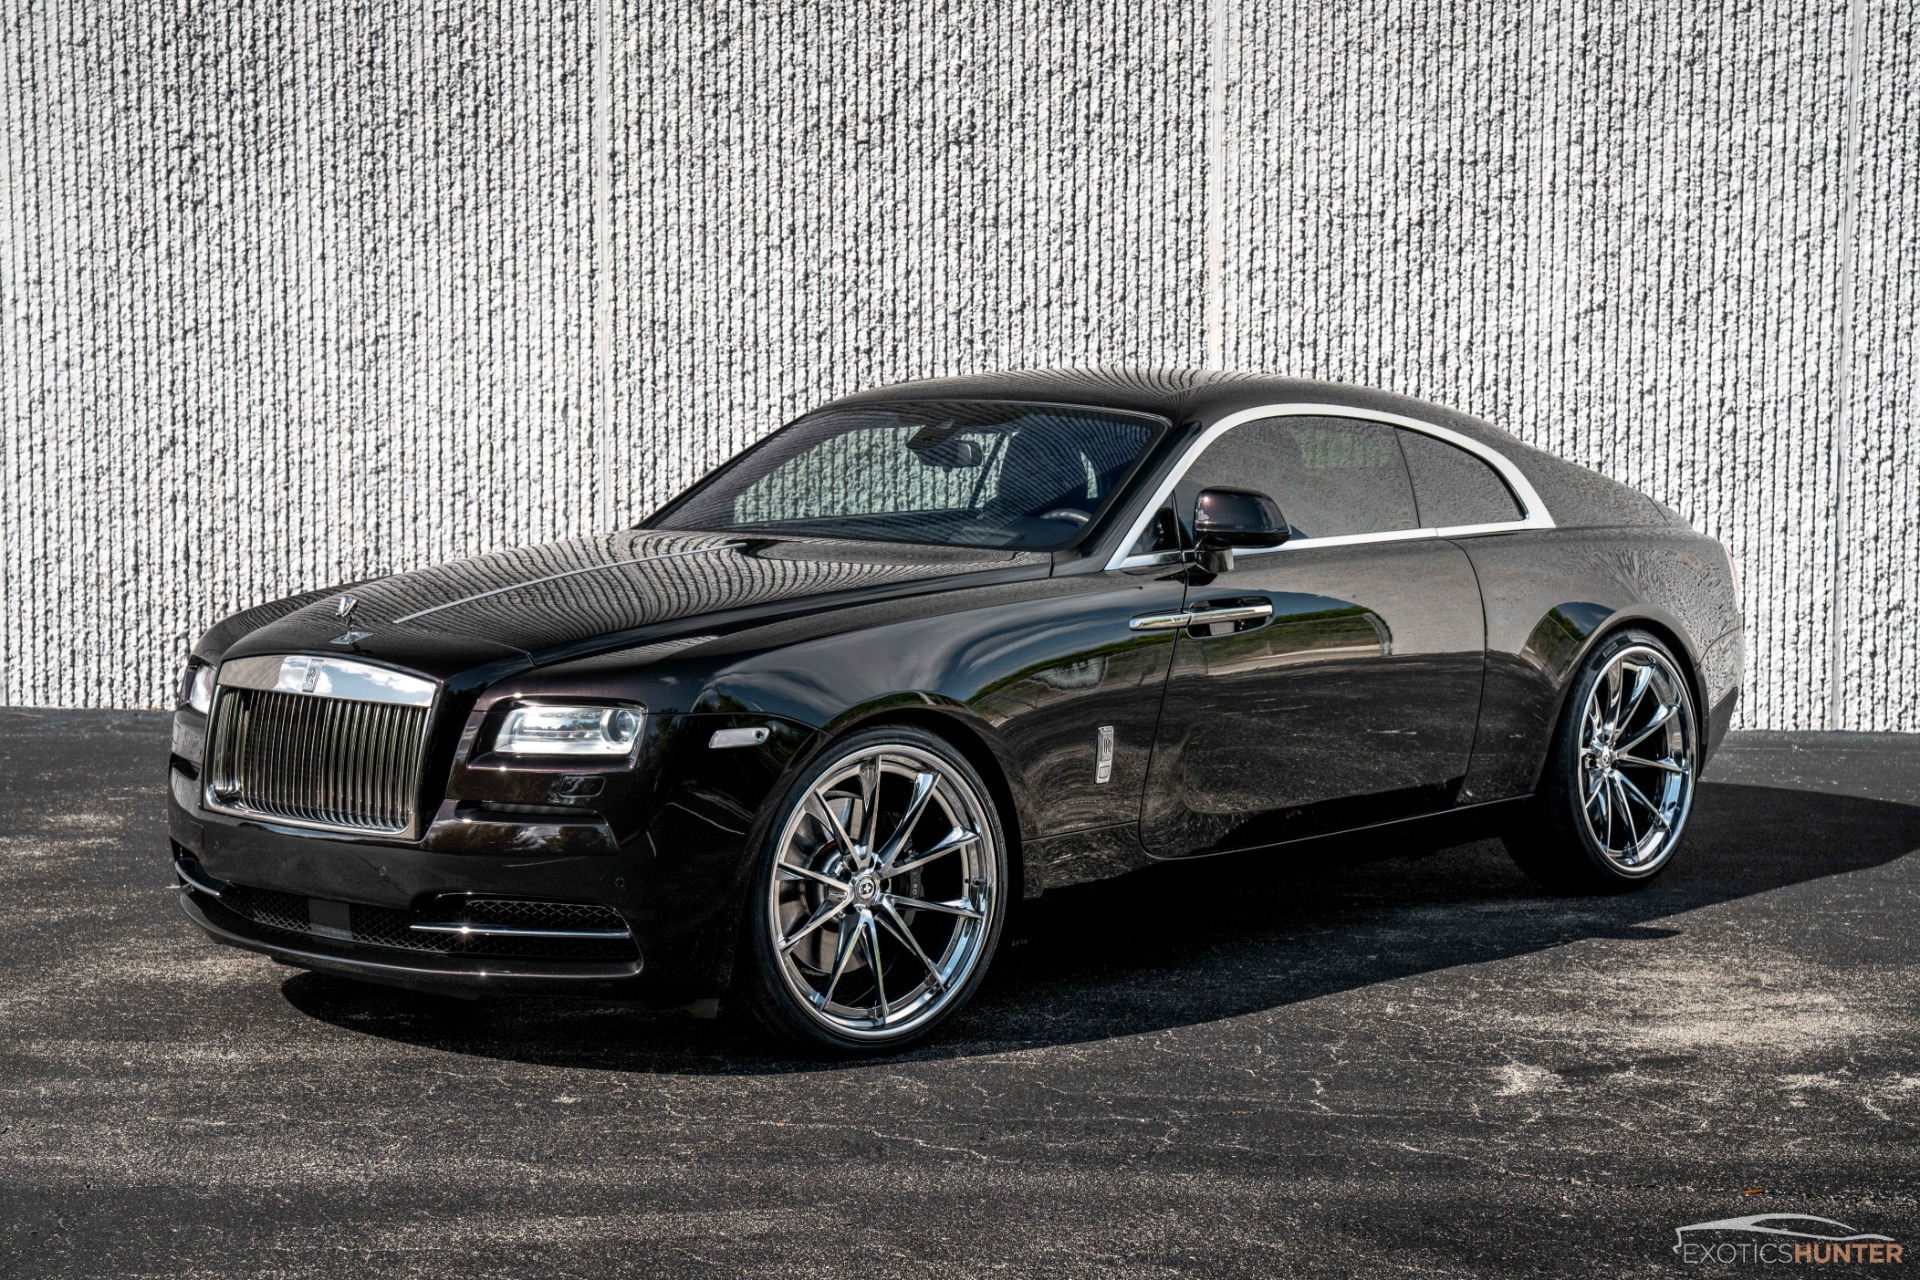 24 inch ConcavoM rims on the noble Rolls Royce Wraith